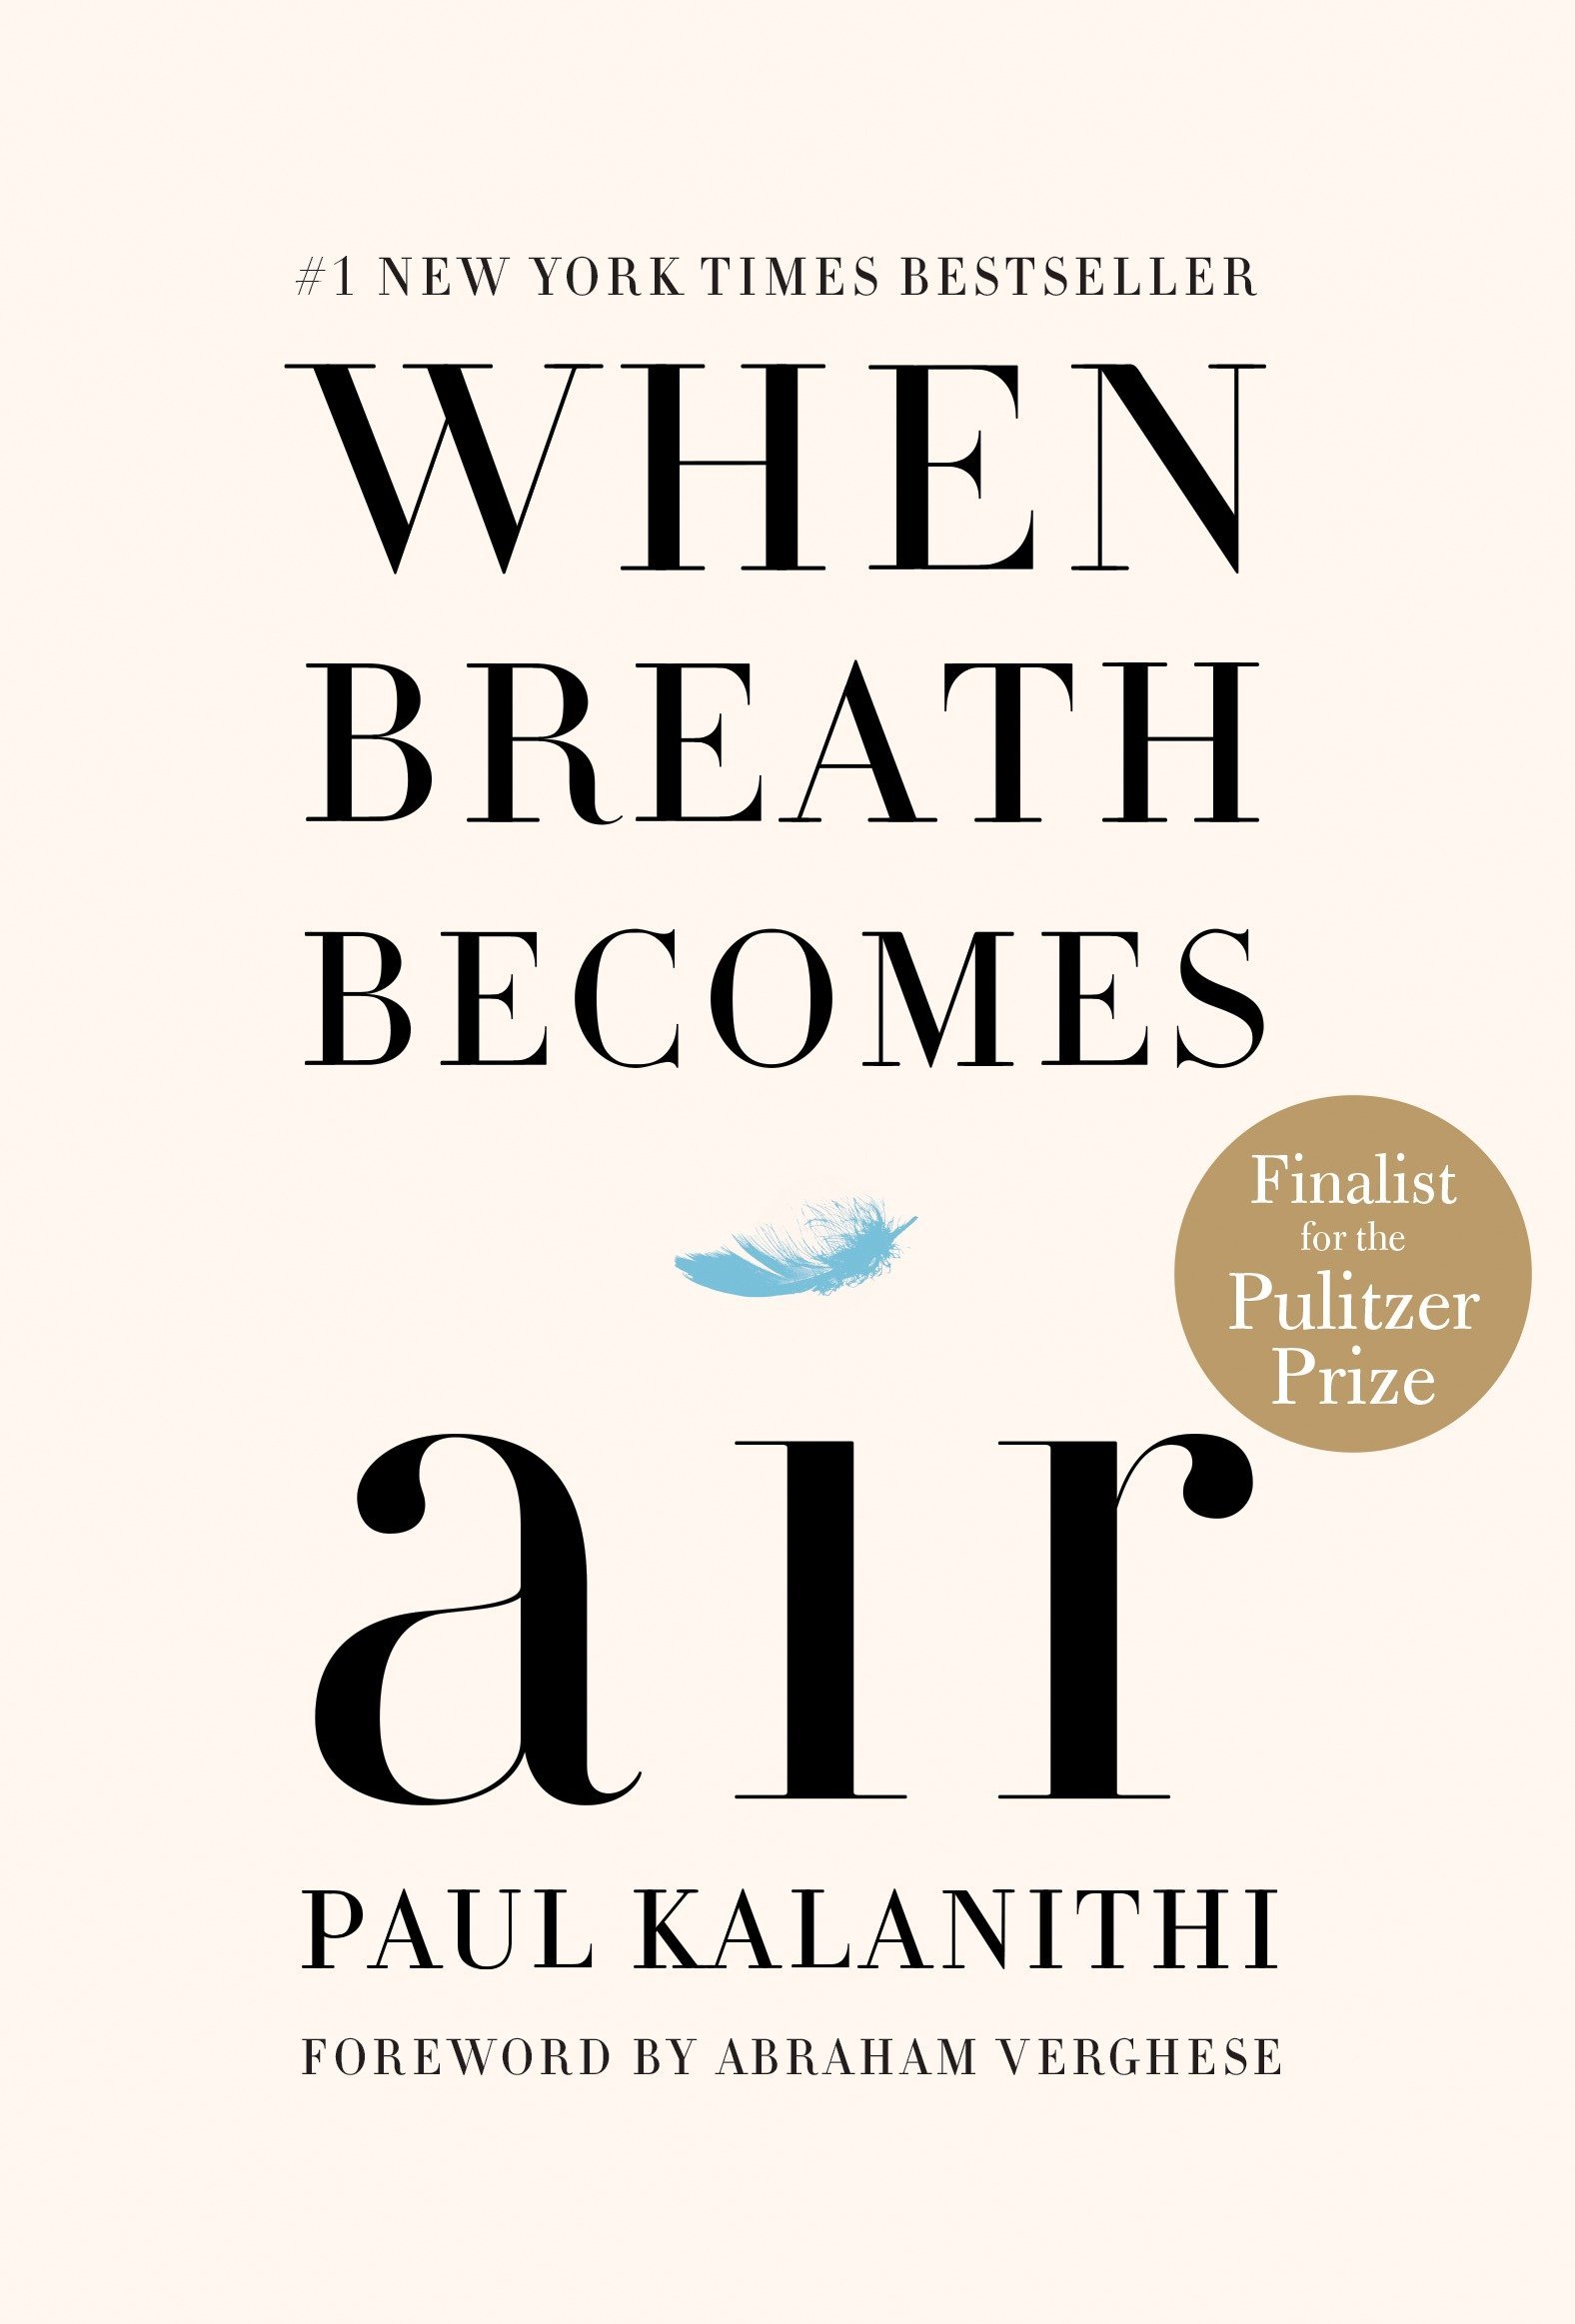 The book cover for When Breath Becomes Air.